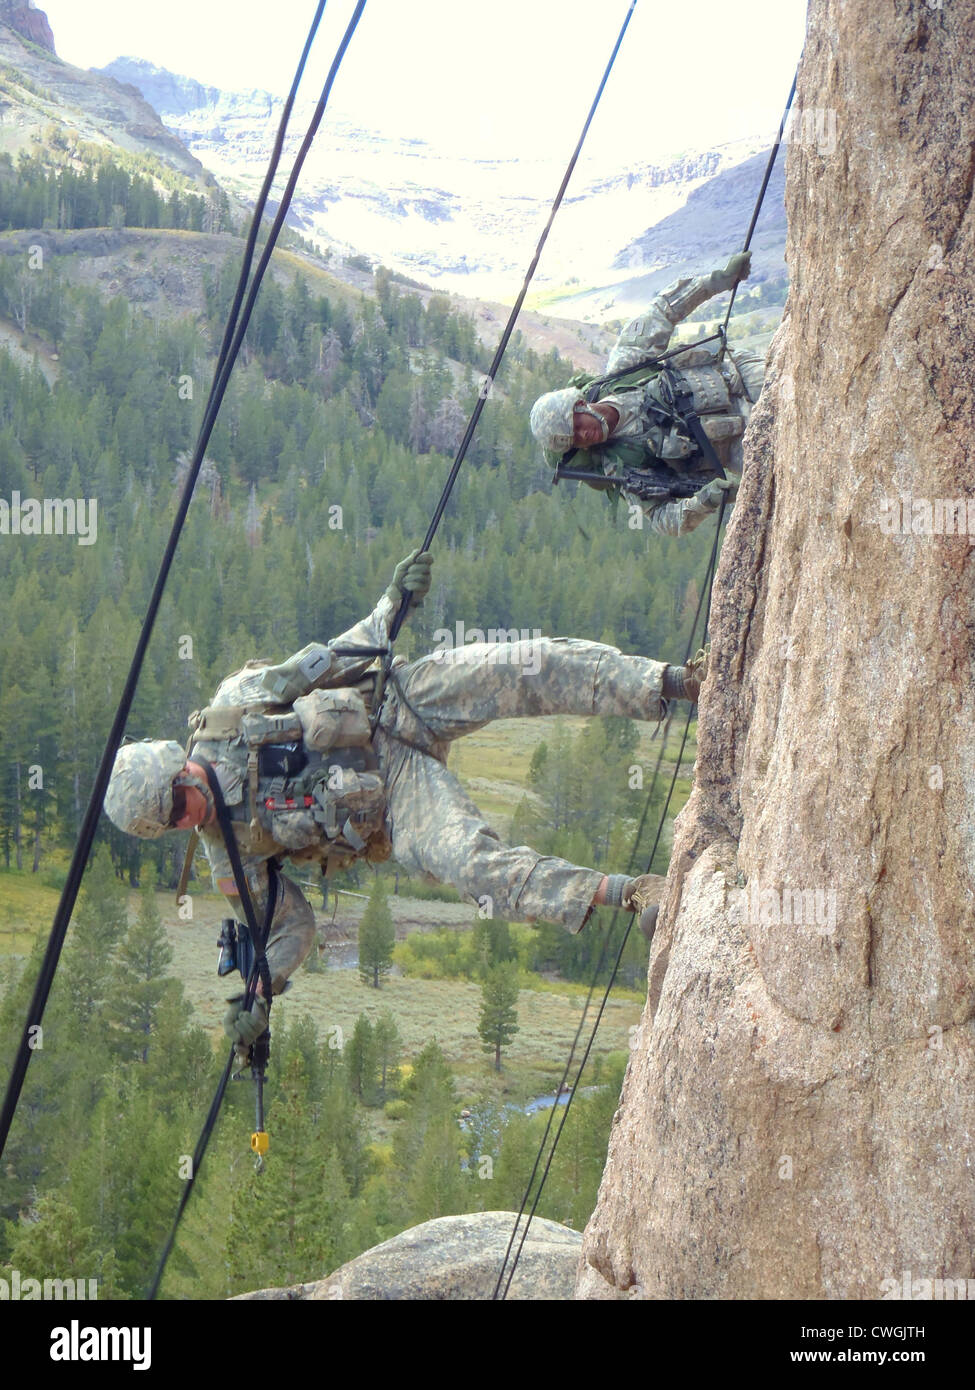 US Army soldiers attend a three week-long Assault Climbers training at the Marine Corpsâ Mountain Warfare Training Center September 22, 2011 in Northern California. This is the first non Special Forces unit to attend this physically challenging exercise. Stock Photo